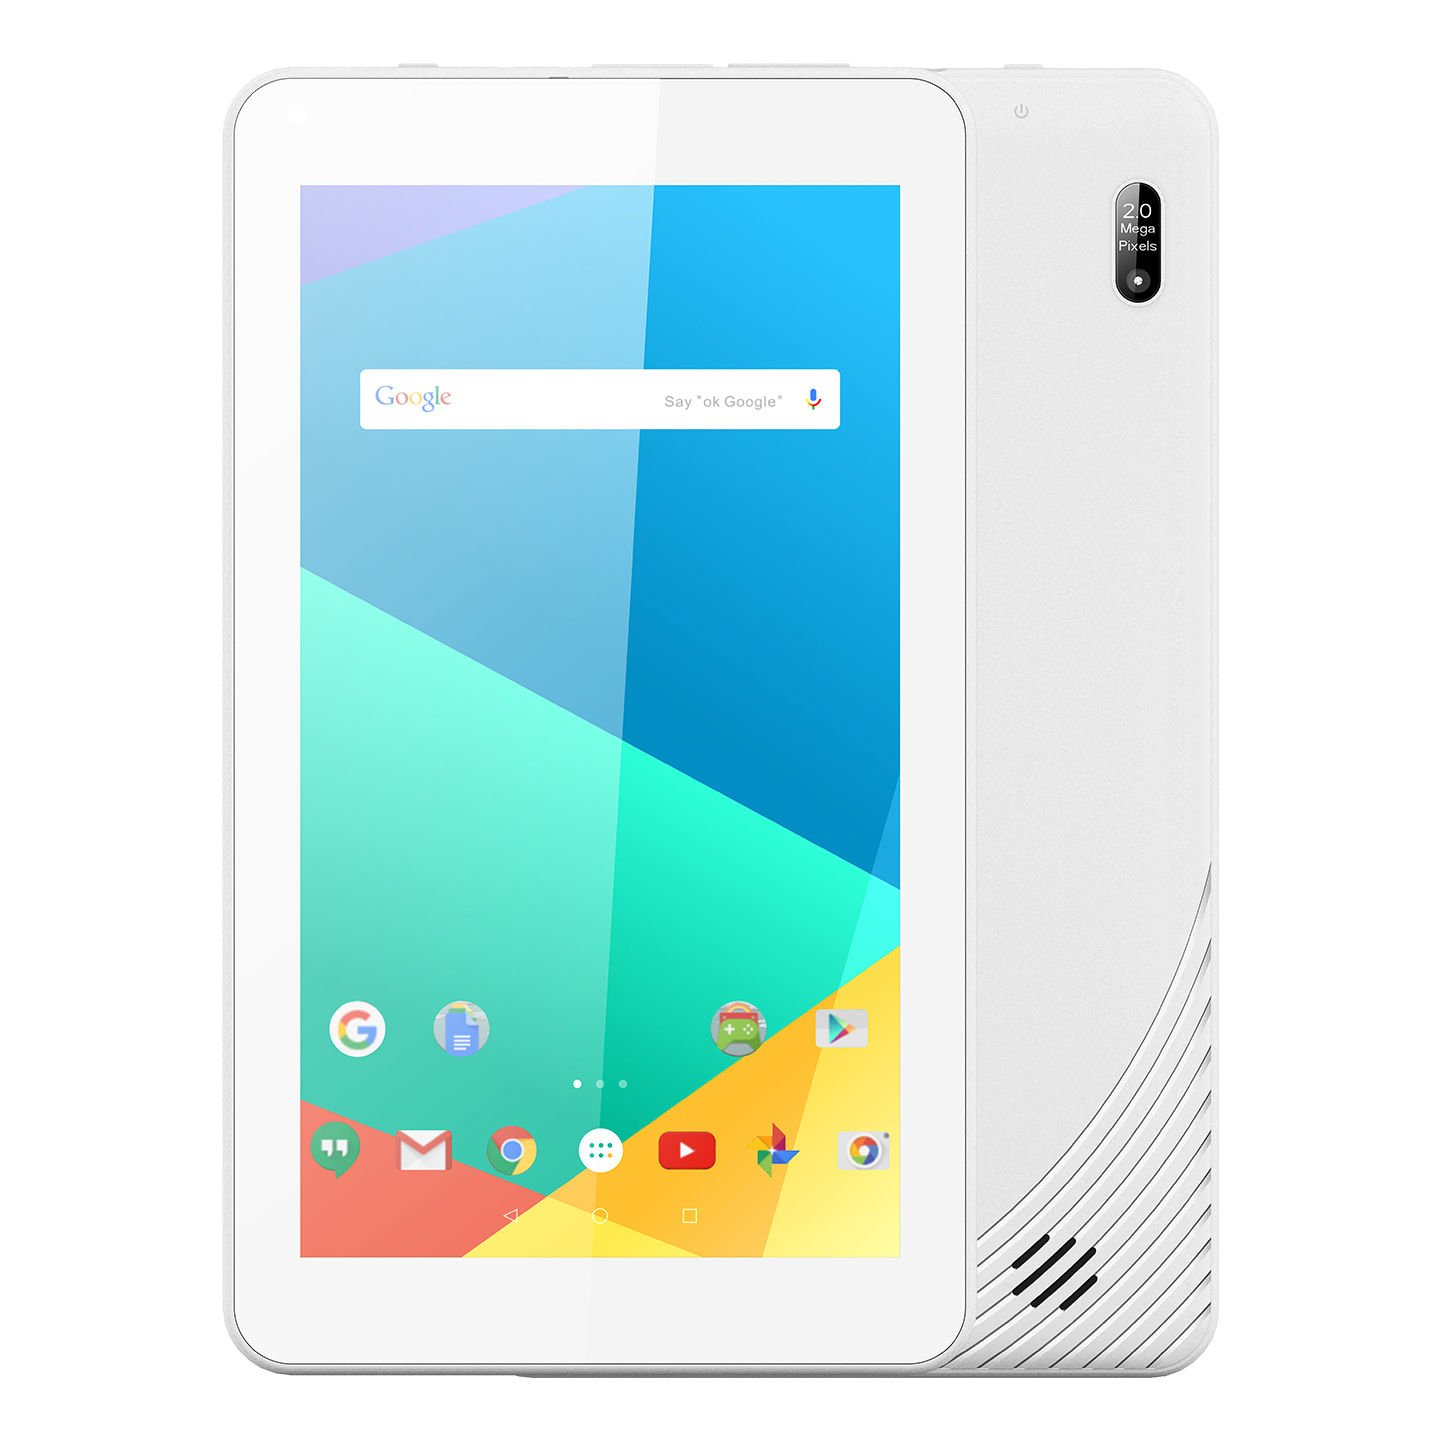 EVEREST WINNER PRO EW-2021 QUAD CORE 2GB DDR3 16GB WIFI/BT 7'' 1024X600 DUAL CAMERA WHITE ANDROID 10.0 GO TABLET